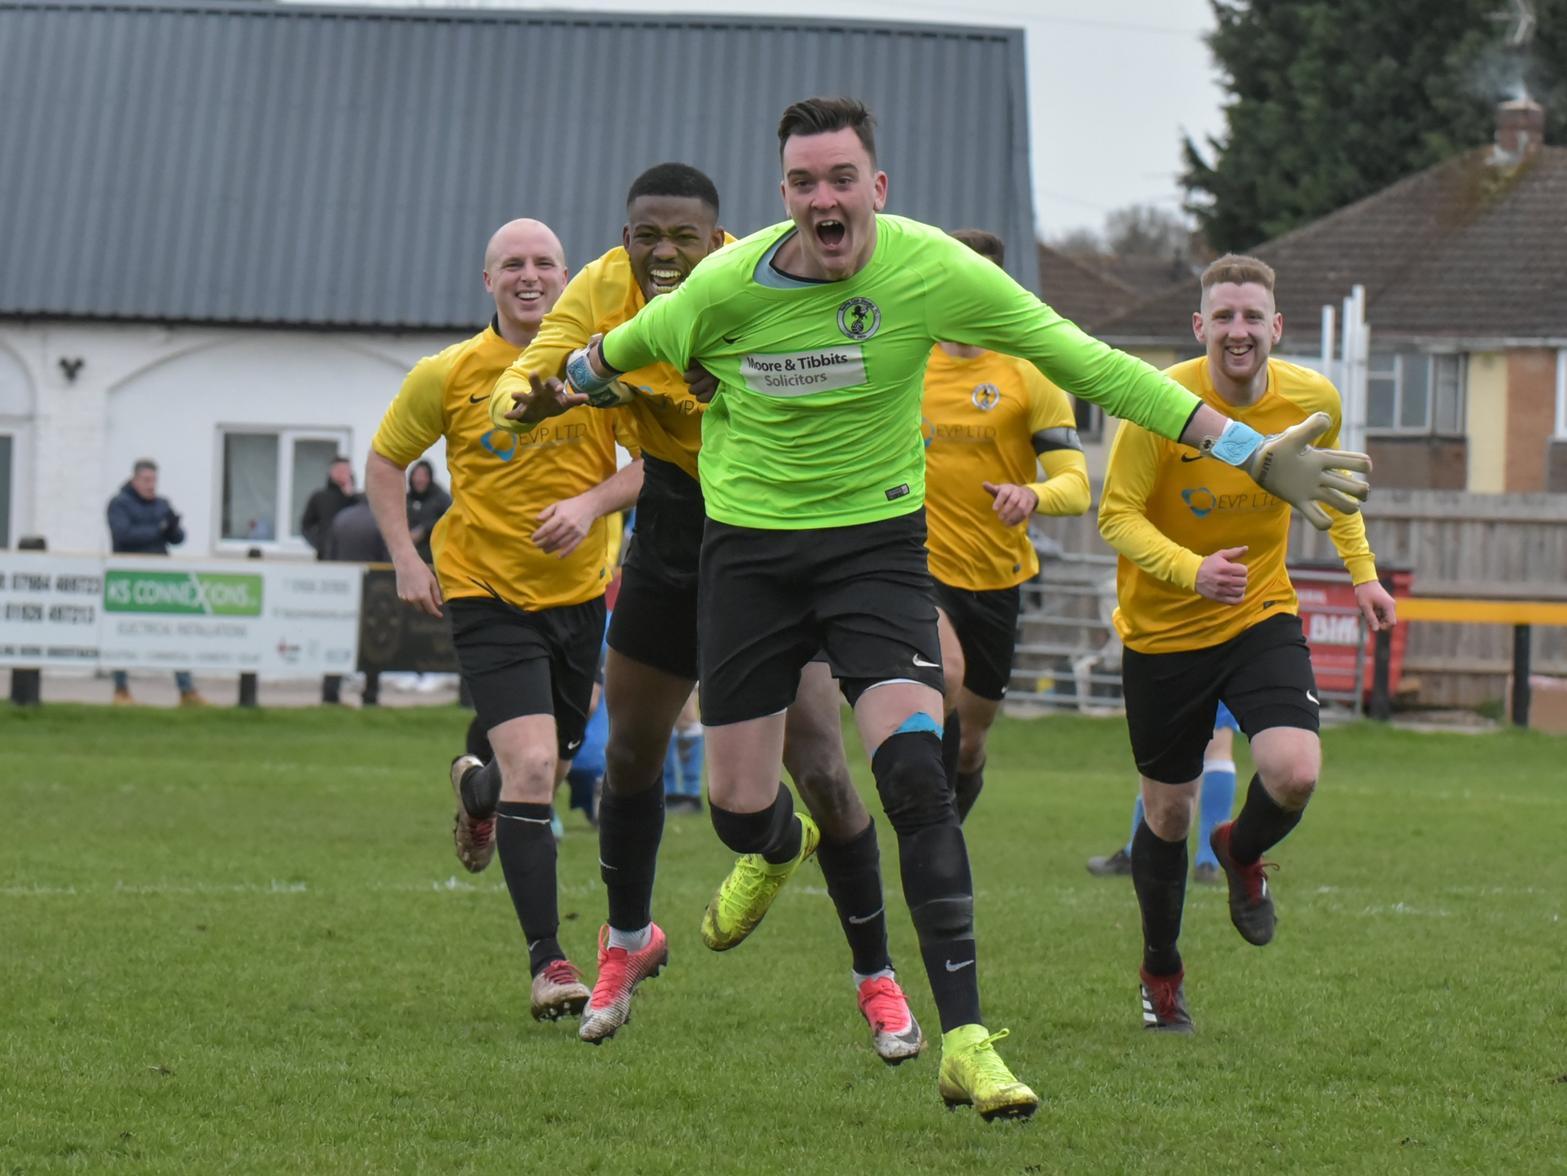 A dramatic injury-time equaliser from goalkeeper Charlie Bannister capped a rousing fightback from 3-0 down for Racing Club Warwick against their fellow promotion hopefuls, Lichfield, in March. Photo by Louise Smith.